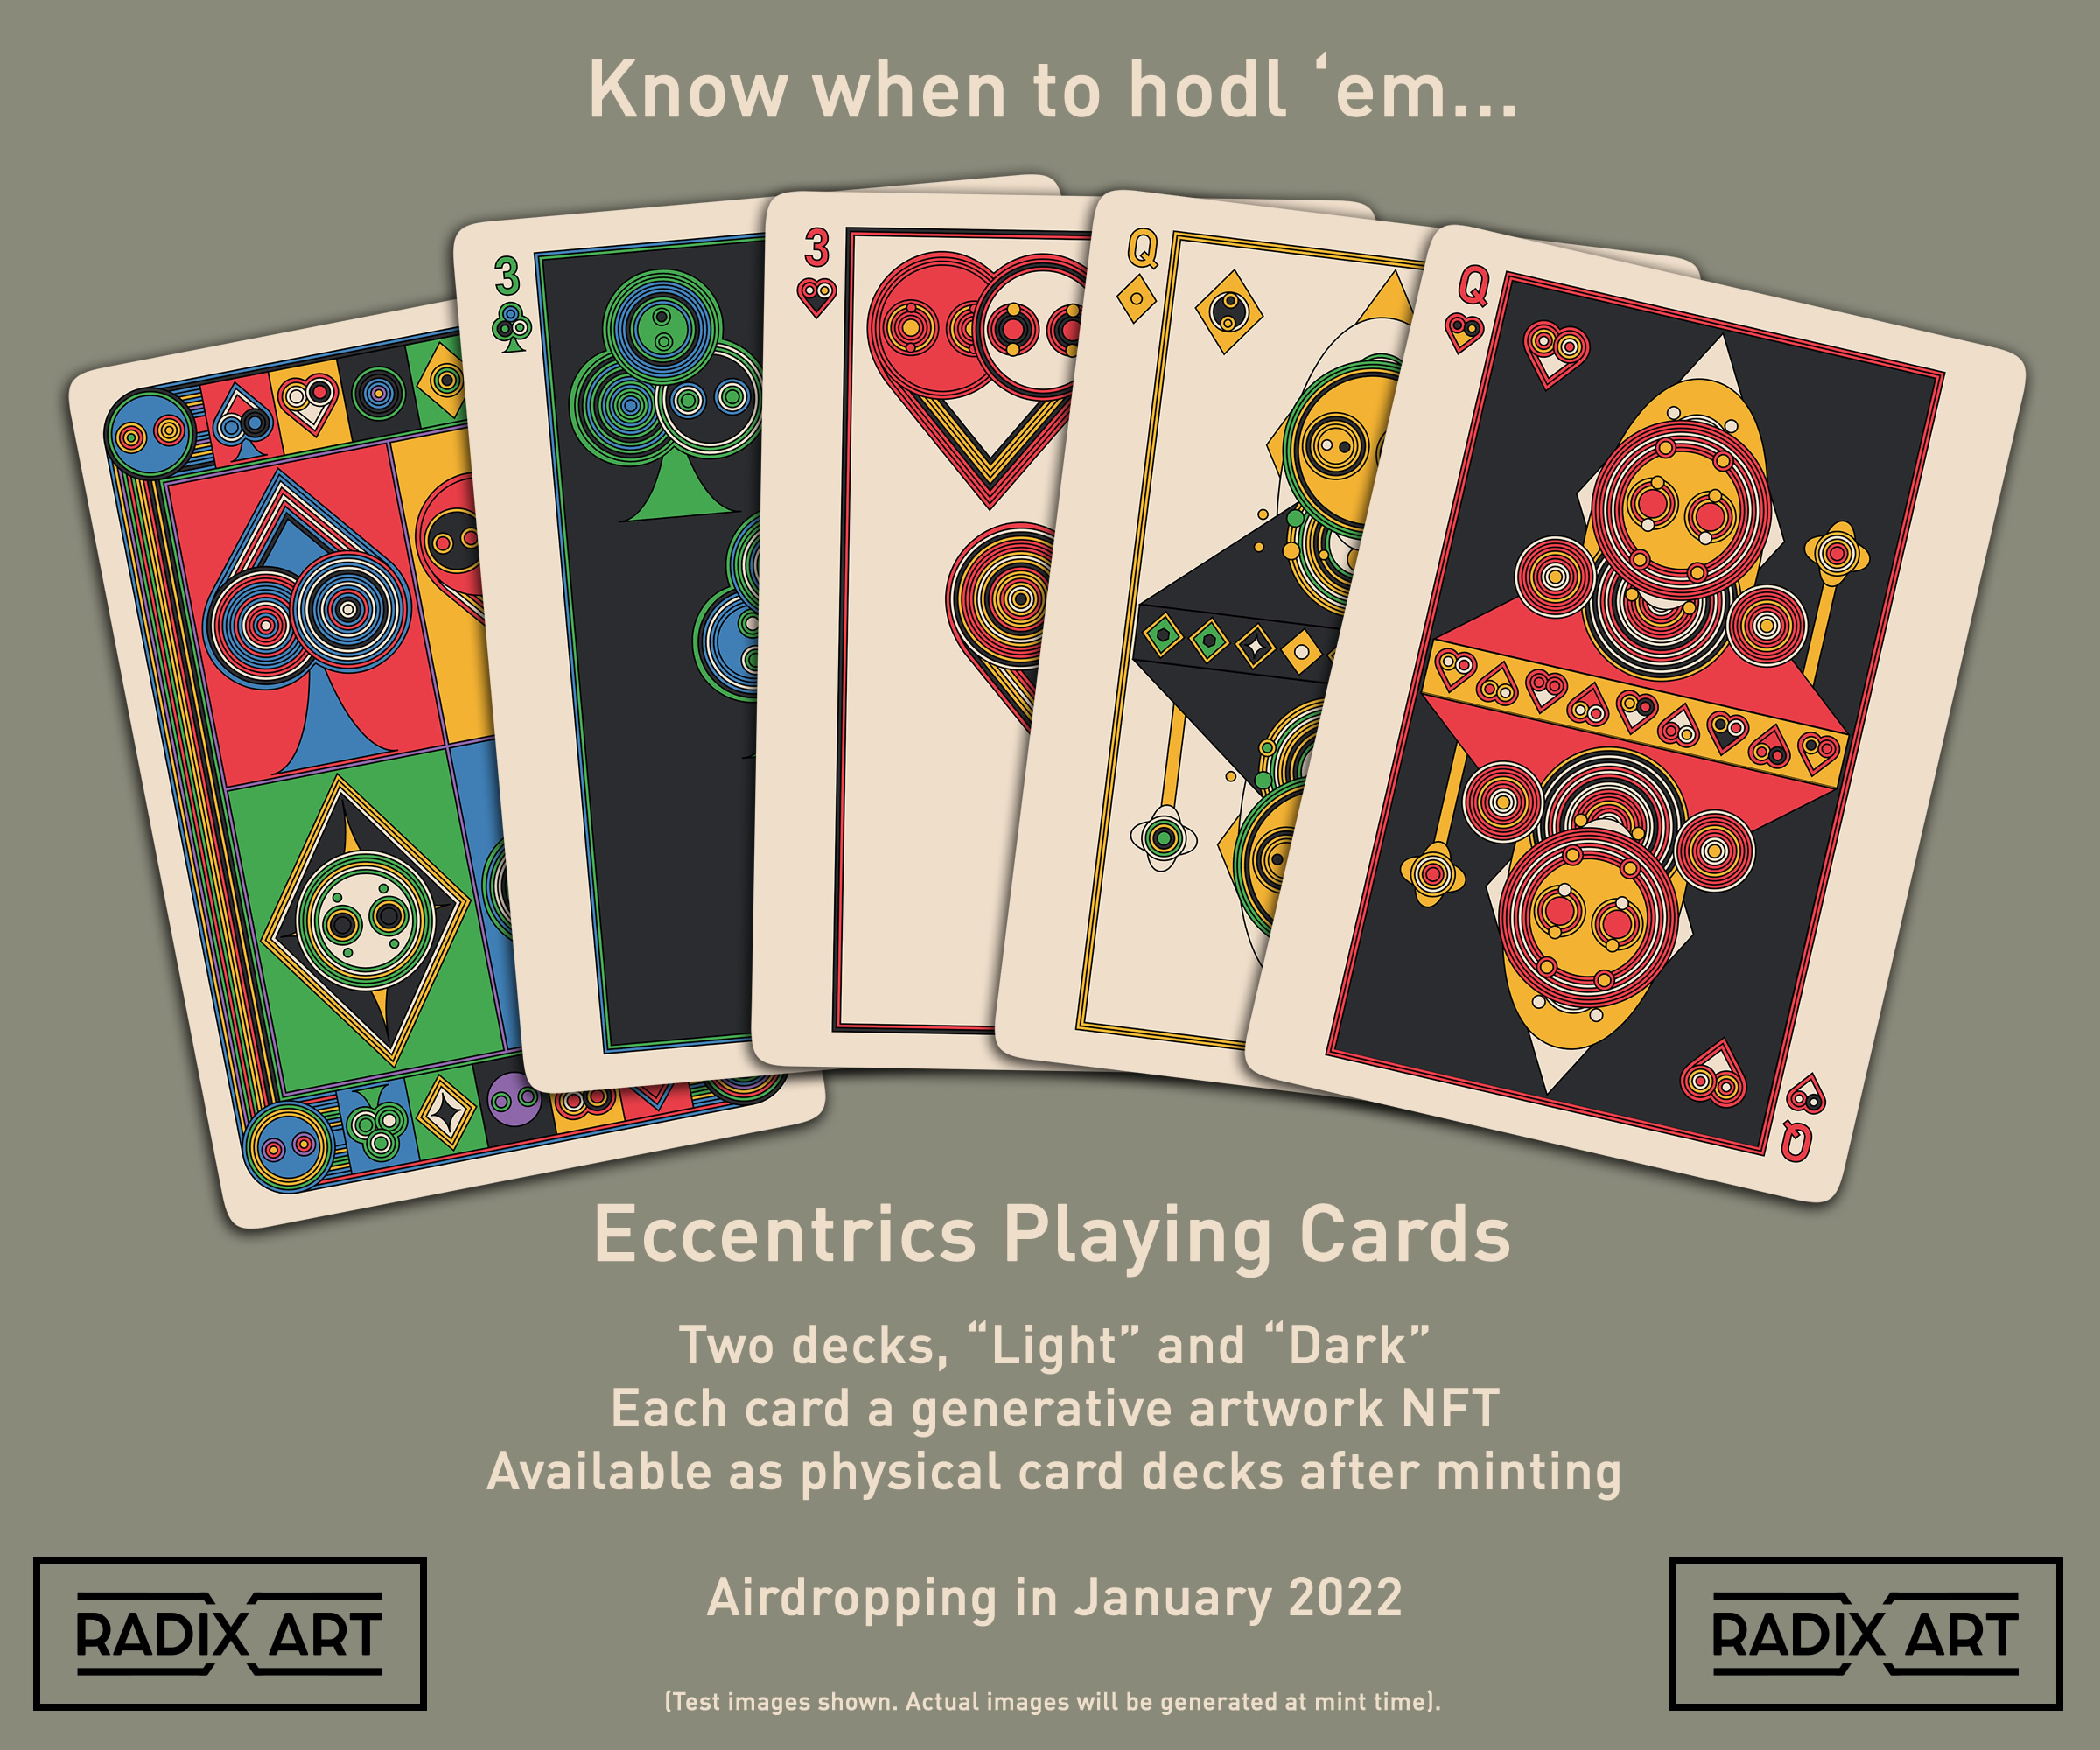 Promo image for Eccentrics Playing Cards